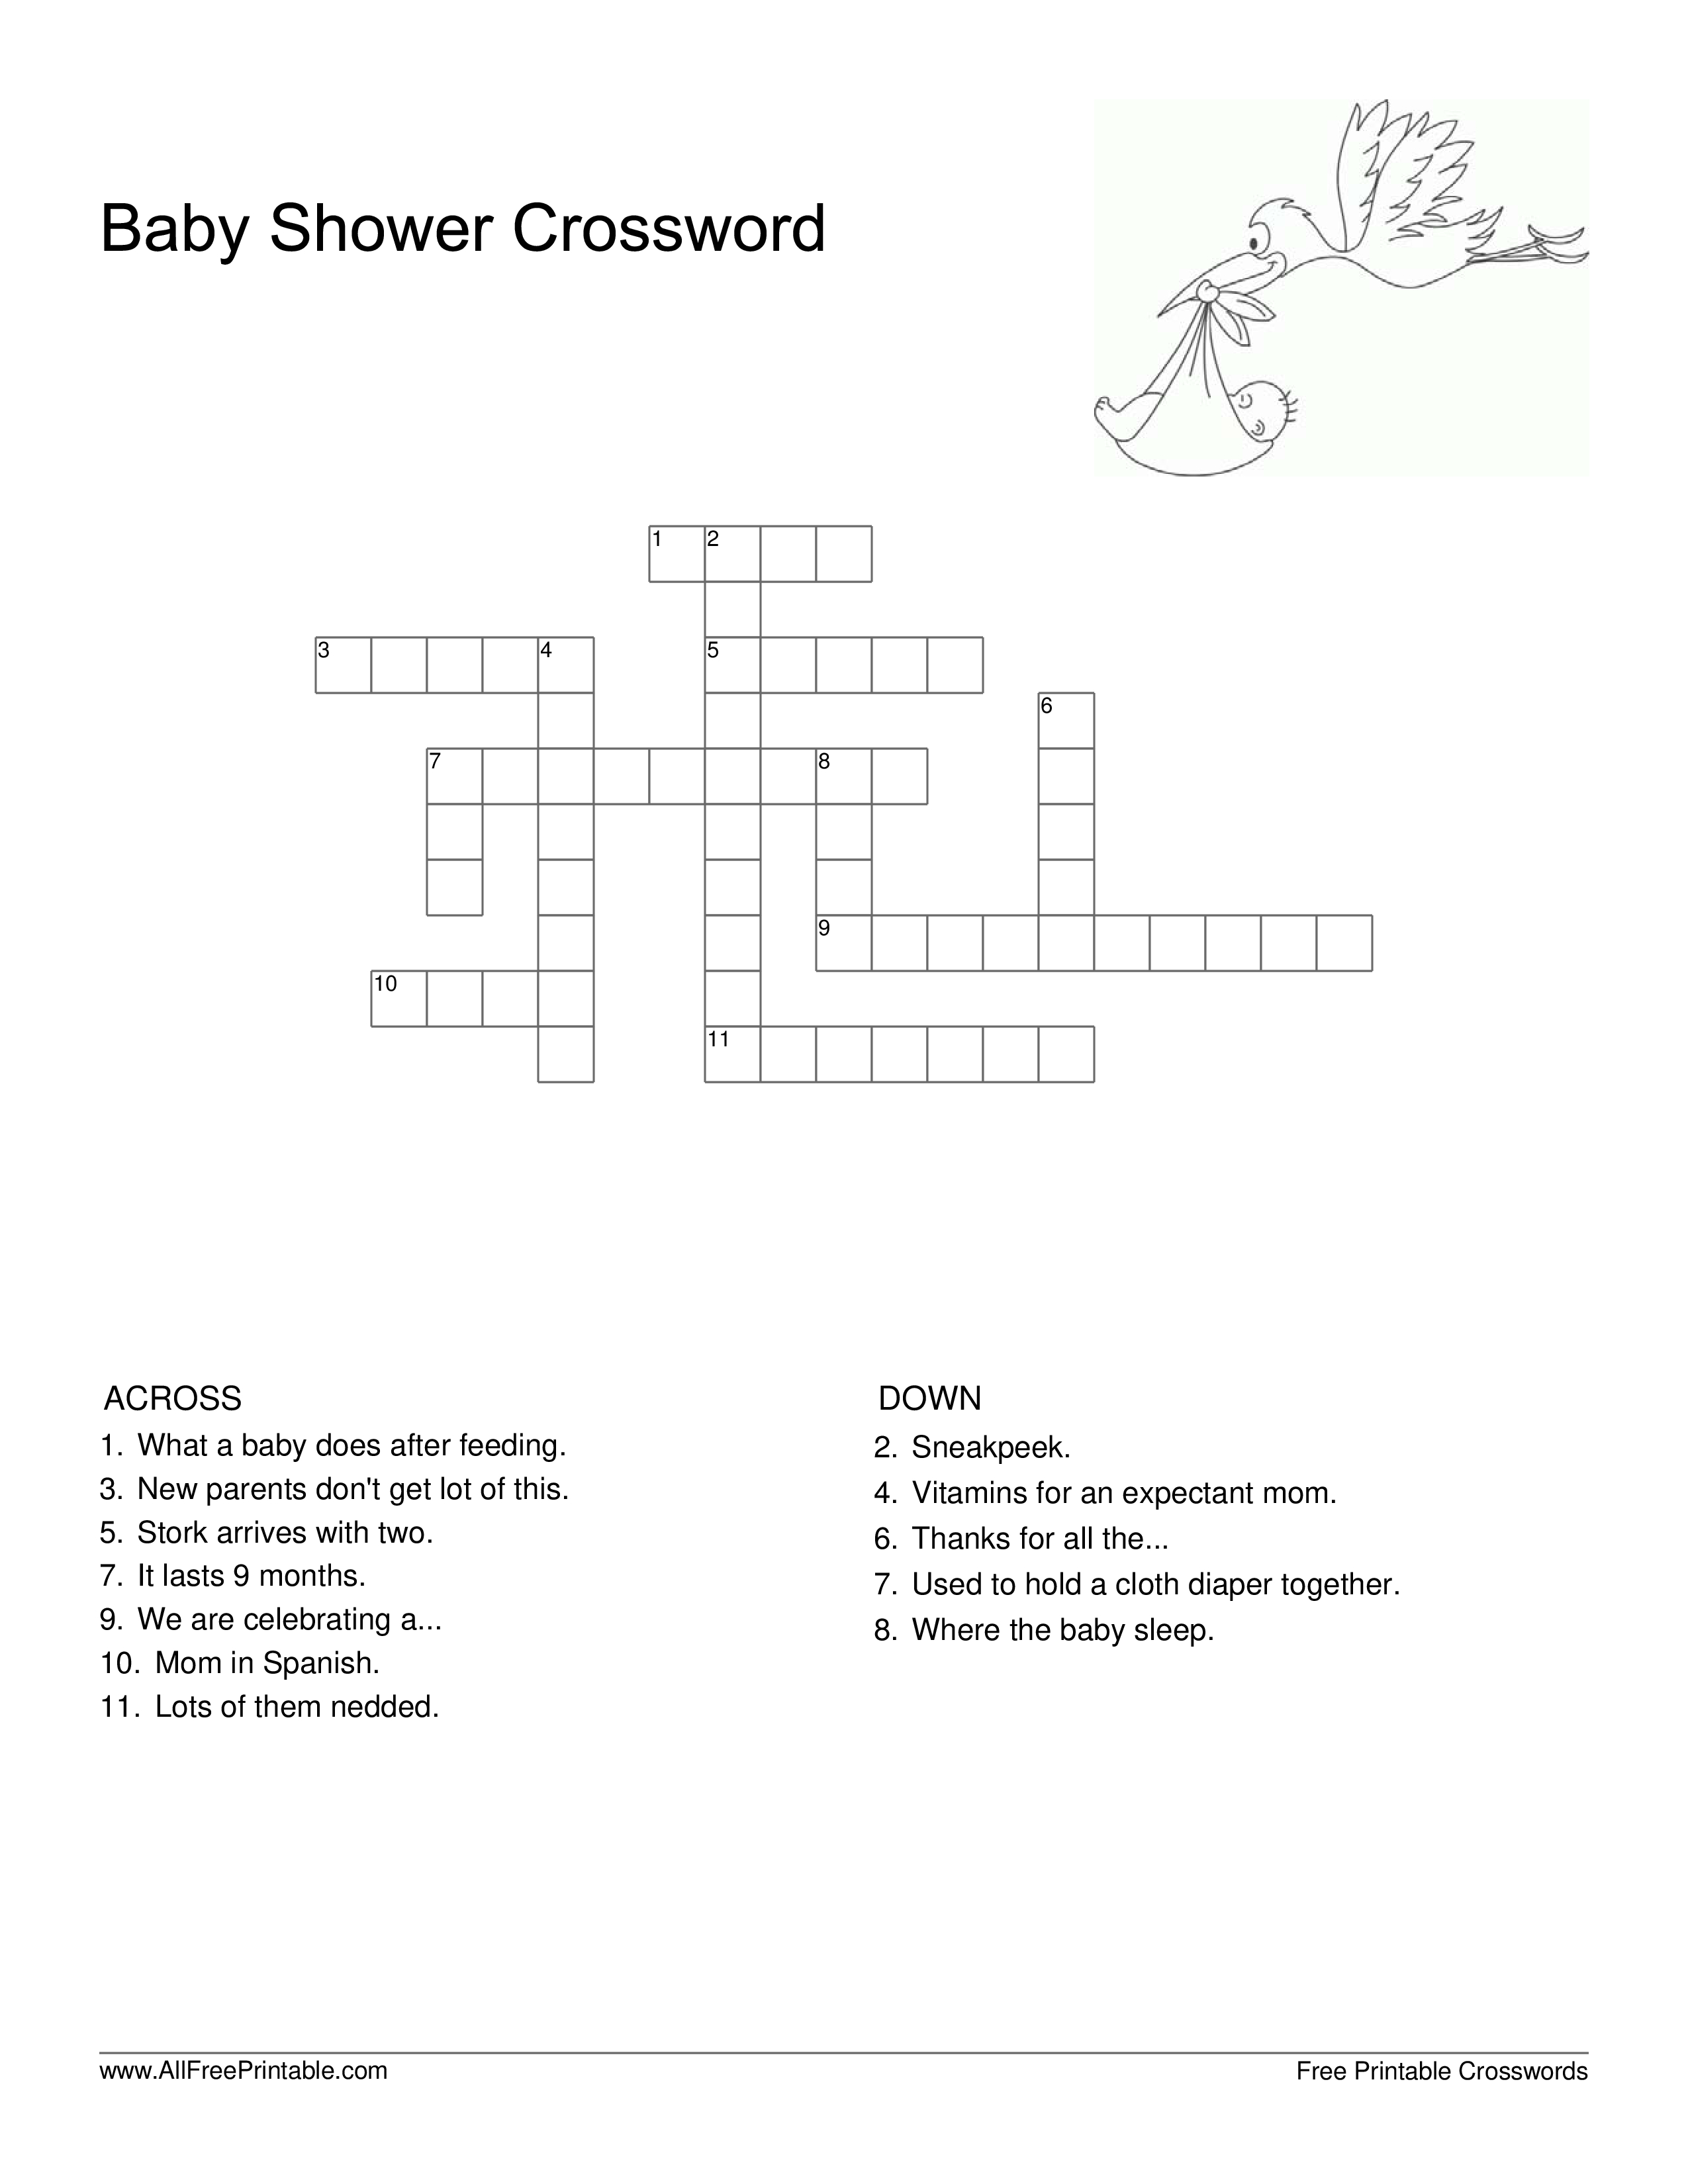 Crosswords Puzzle Baby Shower | Templates At Allbusinesstemplates - Free Printable Baby Shower Crossword Puzzle